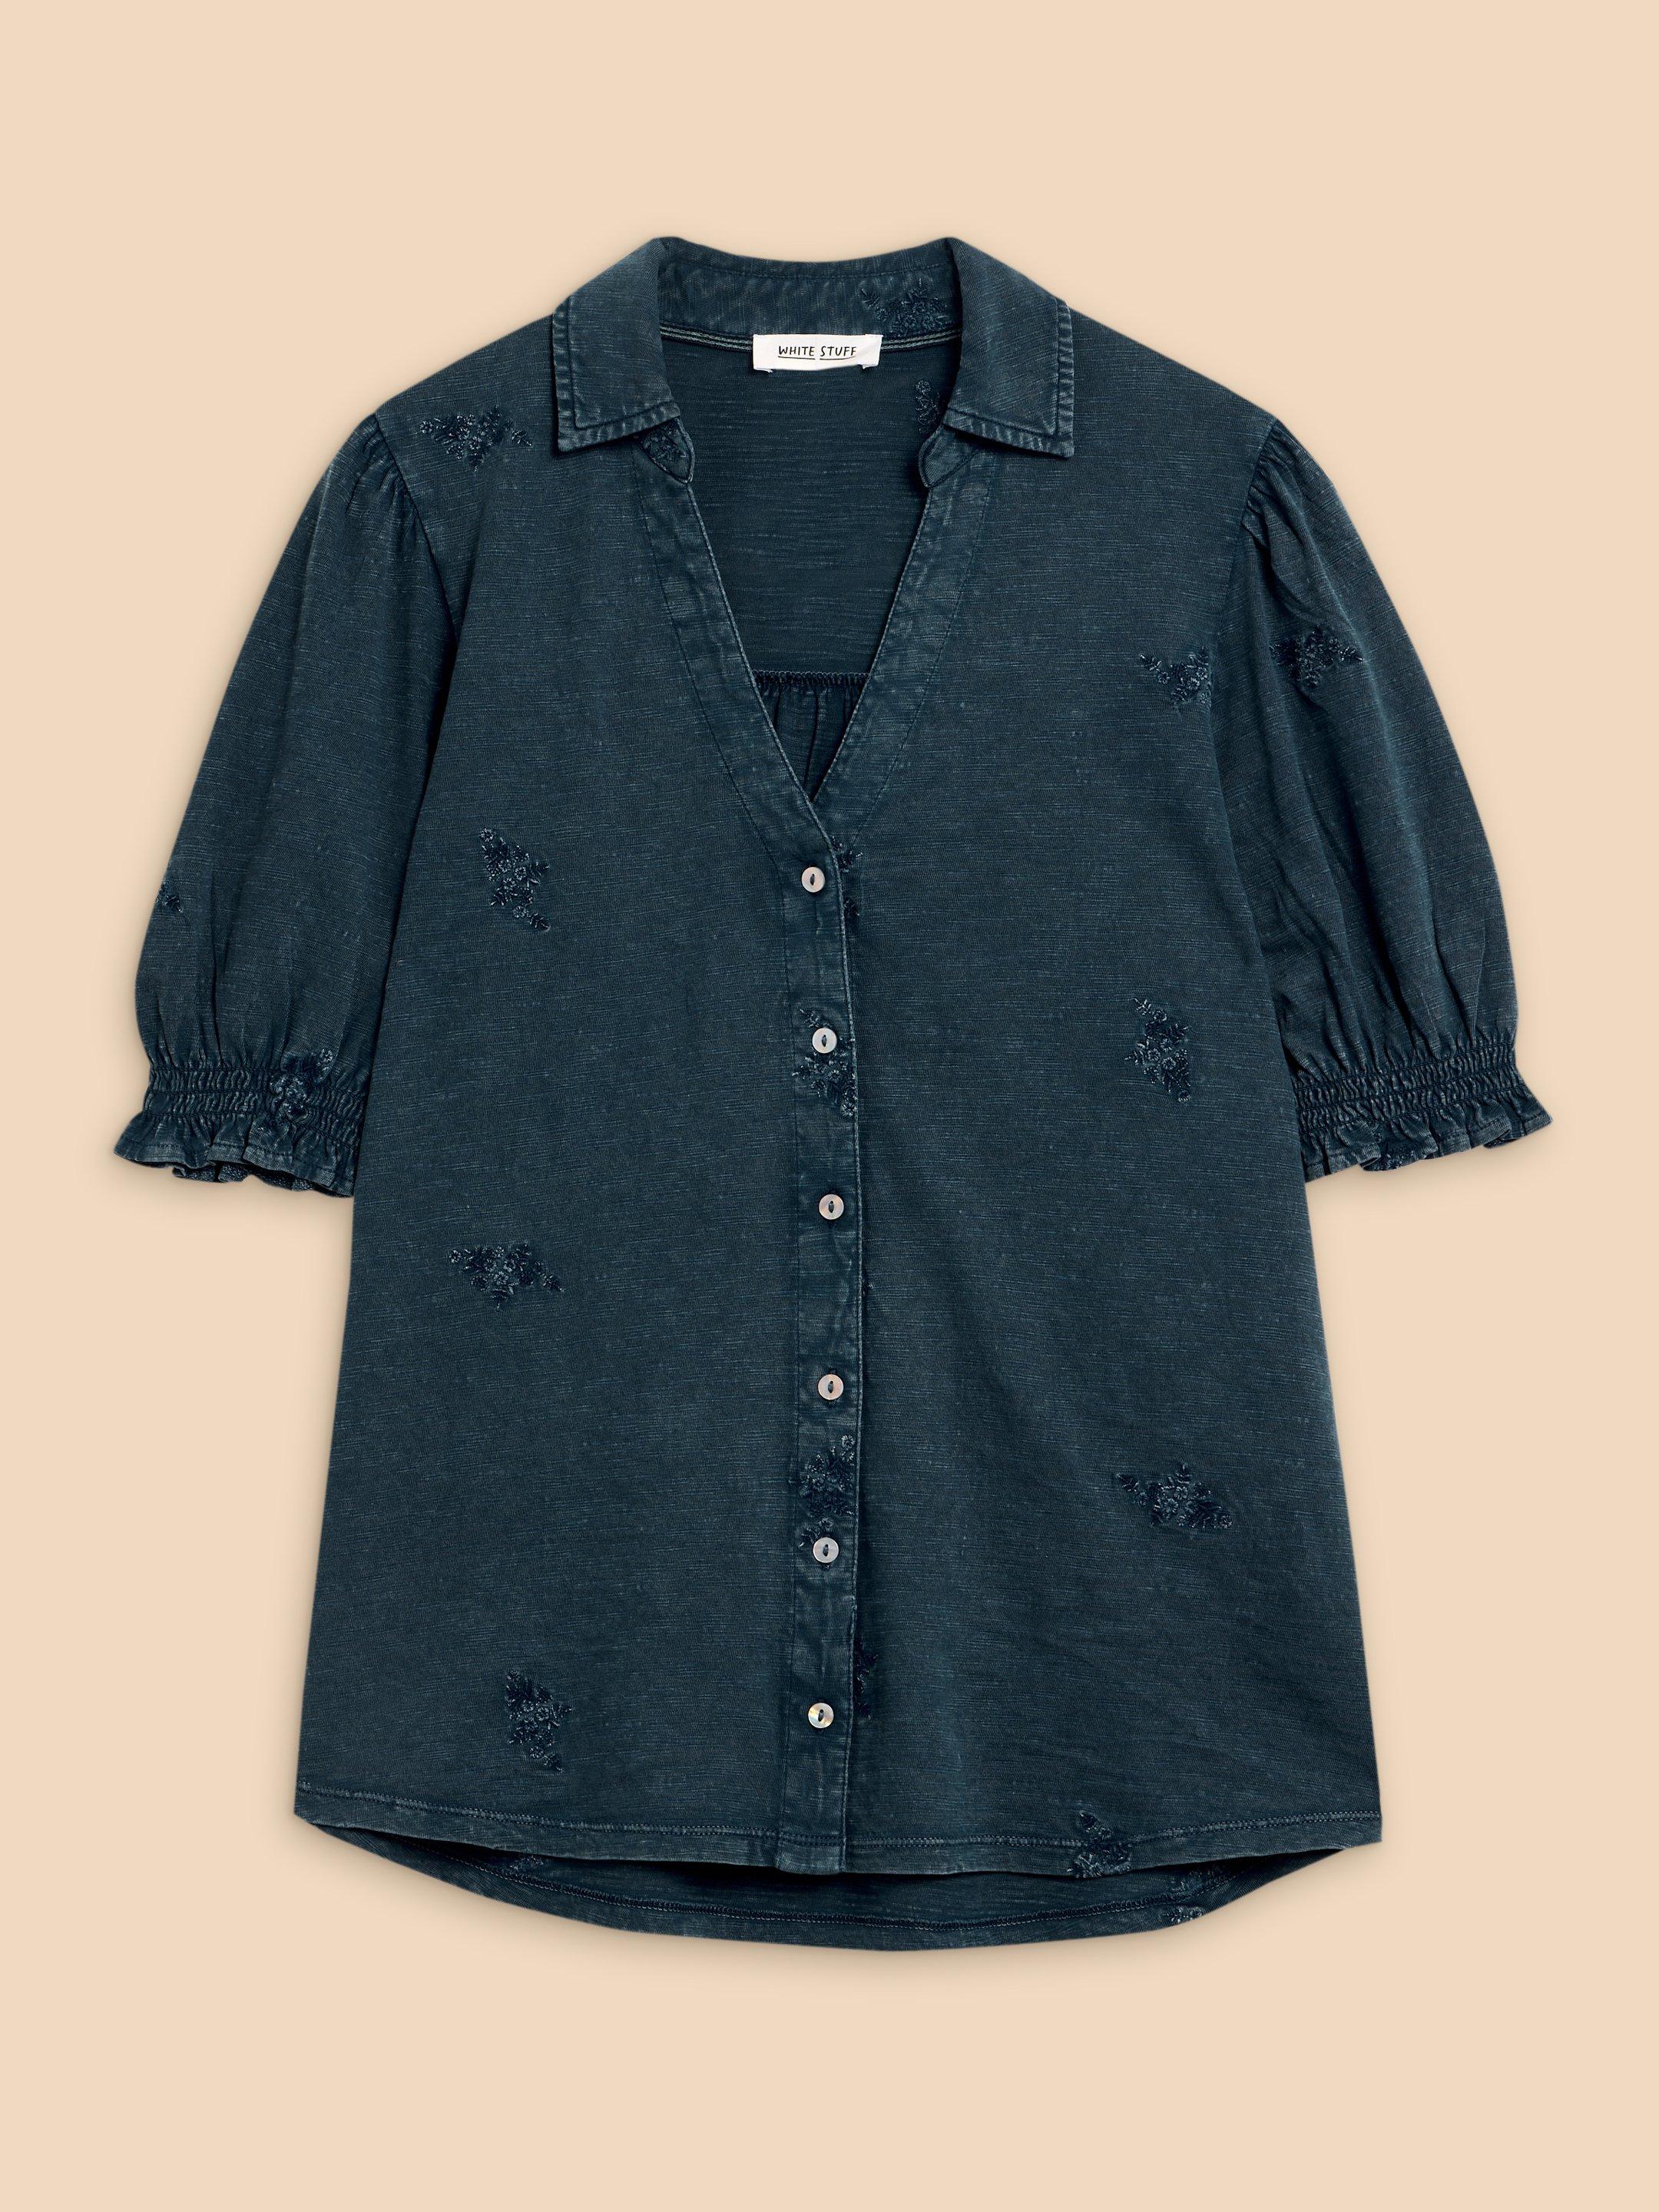 PENELOPE EMBROIDERED SHIRT in INDIGO BLE - FLAT FRONT